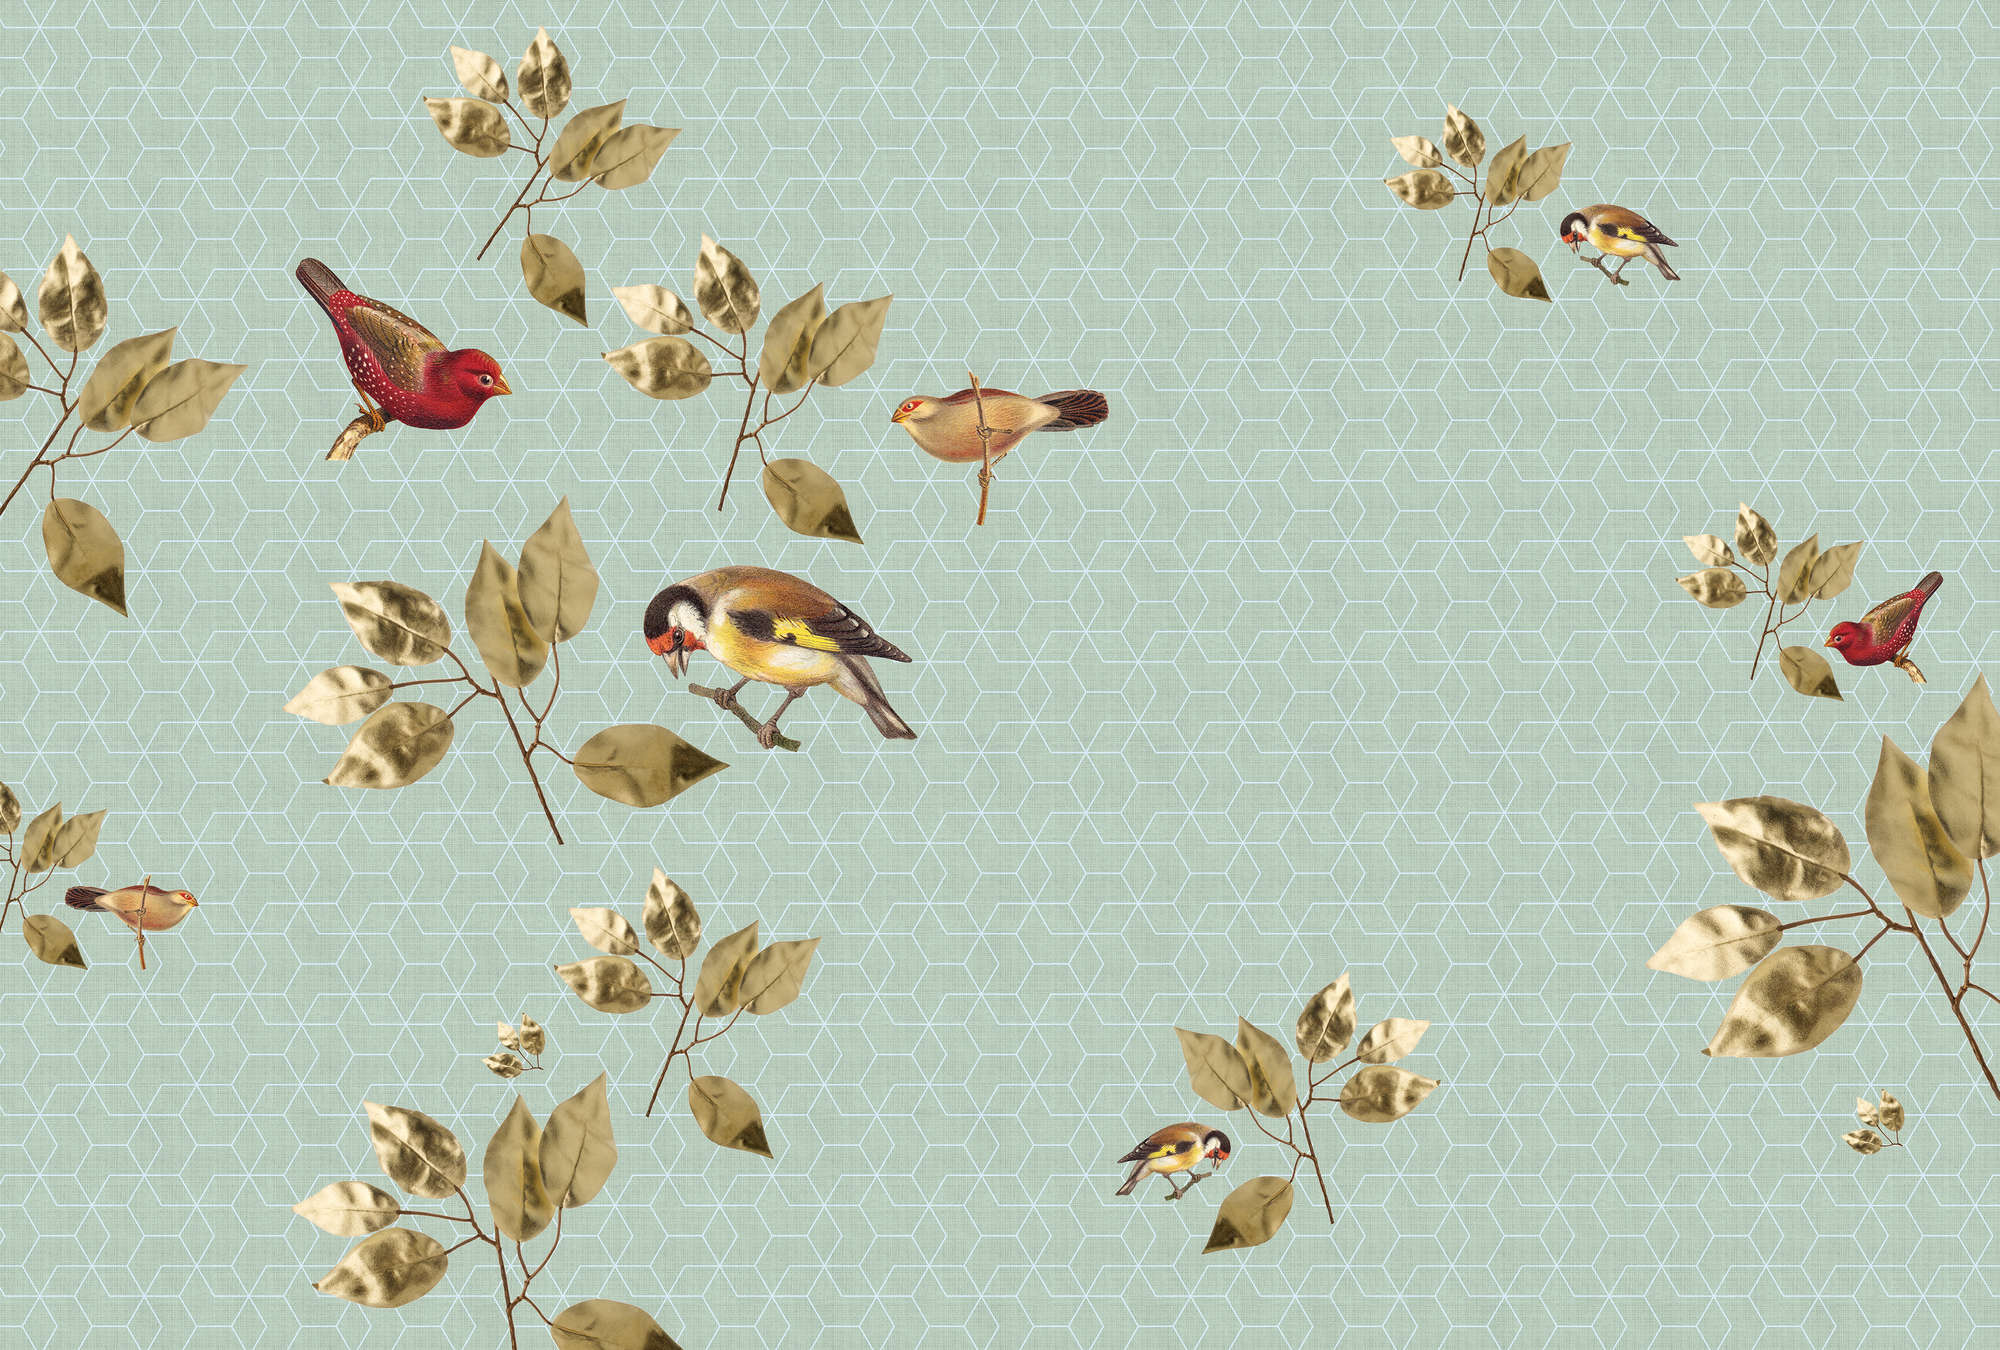             Brilliant Birds 2 - Nature wallpaper geometric design-natural linen structure - Green, Turquoise | Pearl smooth non-woven
        